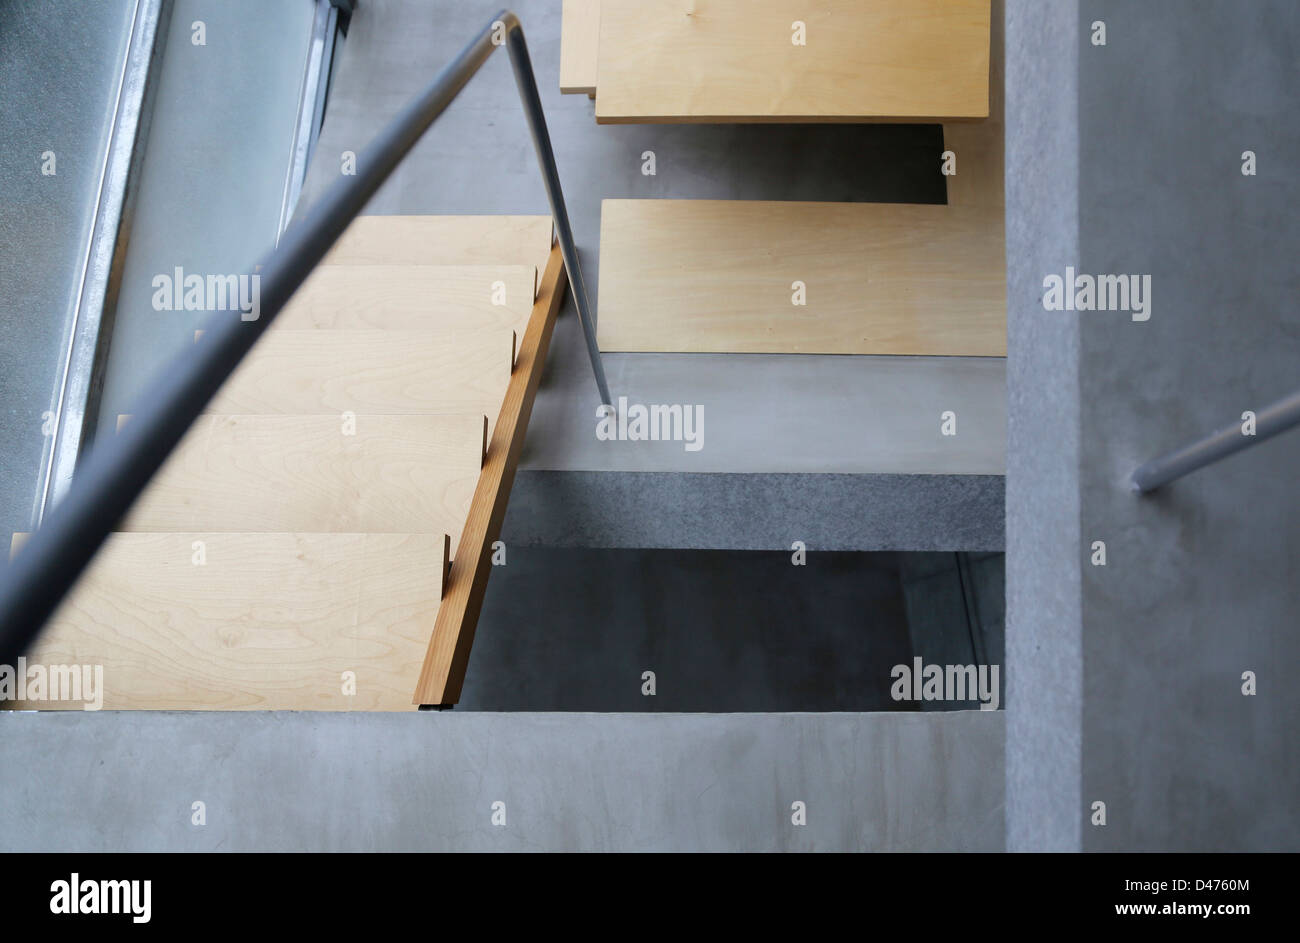 The Mist House, Tokyo, Japan. Architect: TNA, 2012. Interior detail looking at concrete floor. Stock Photo